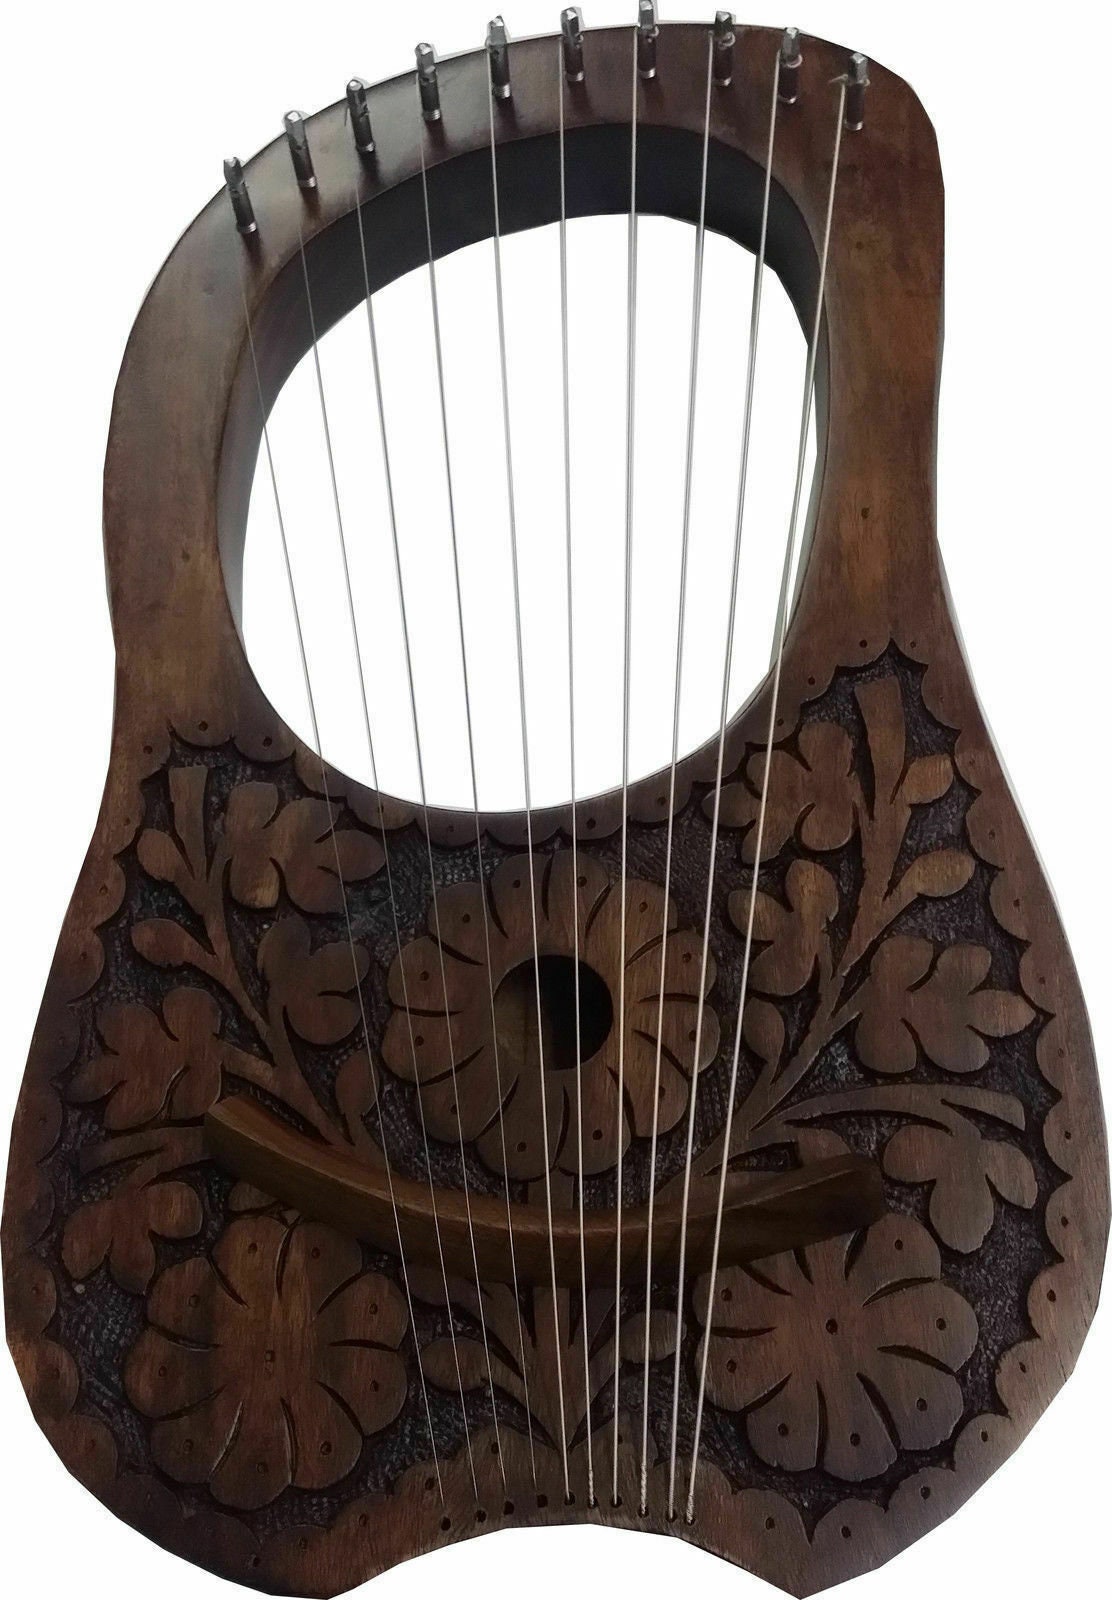 Lyre Harp 10 Strings Hand Engraved Flowers Beautiful Product & Sound Top Quality 